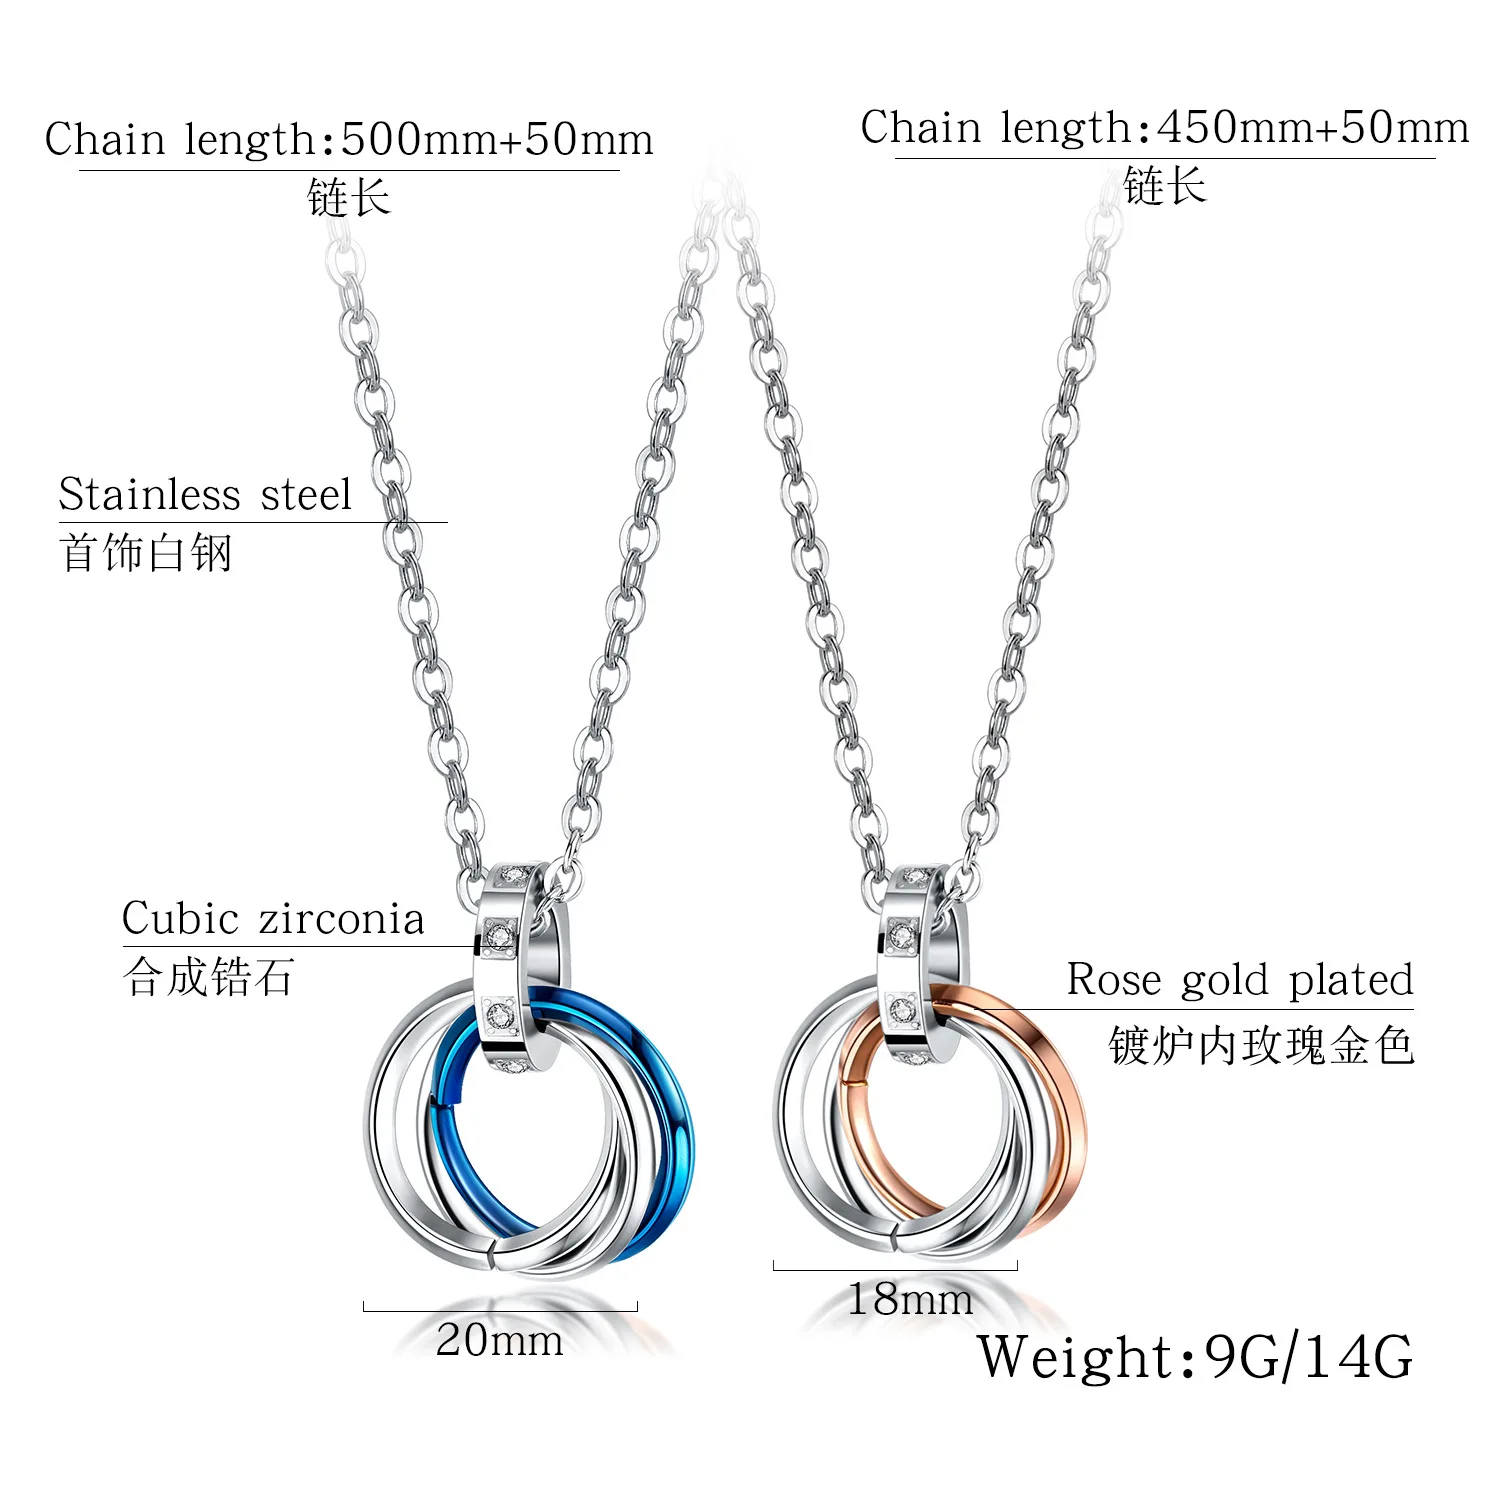 stainless steel couple necklace double ring necklace for couples 316l stainless steel couple jewerly